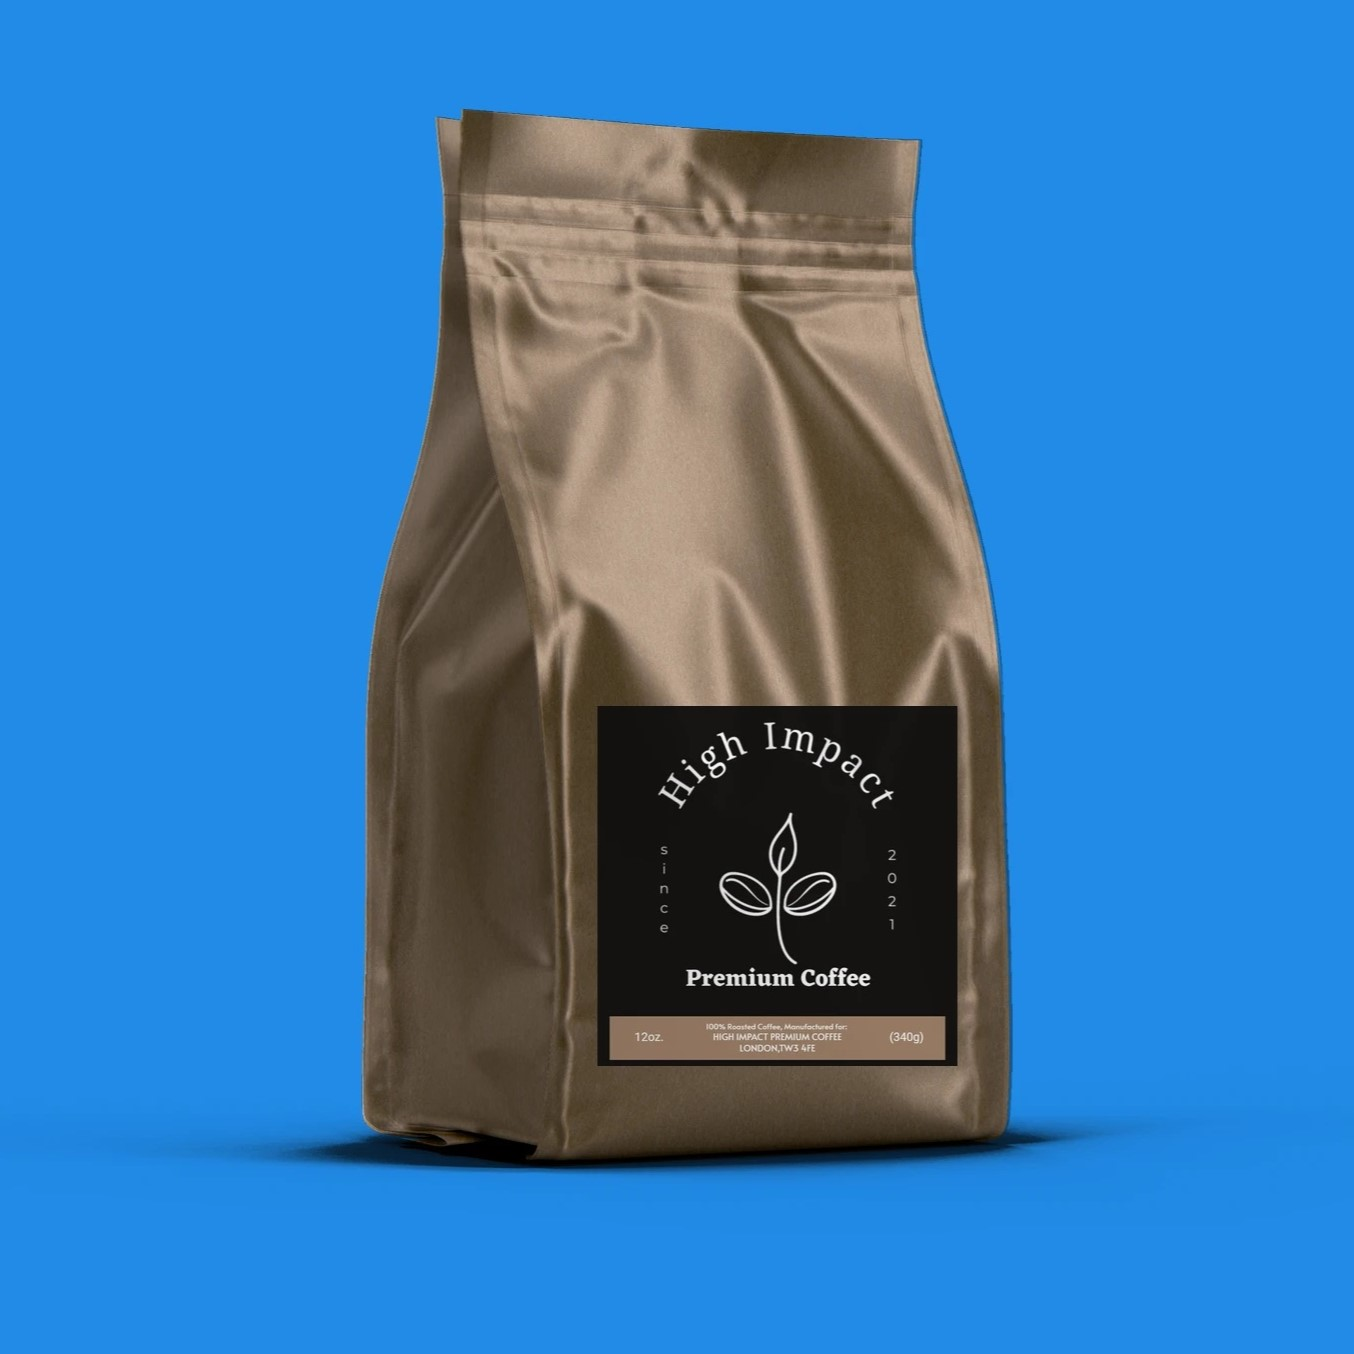 Janszoon Blend-12OZ-weet and Savory with Citric Acidity and Toffee Experience the perfect balance of sweetness and savory notes with this dark roast and low acidity. This full-bodied coffee is elevated by its bright, citric acidity and the rich flavor.